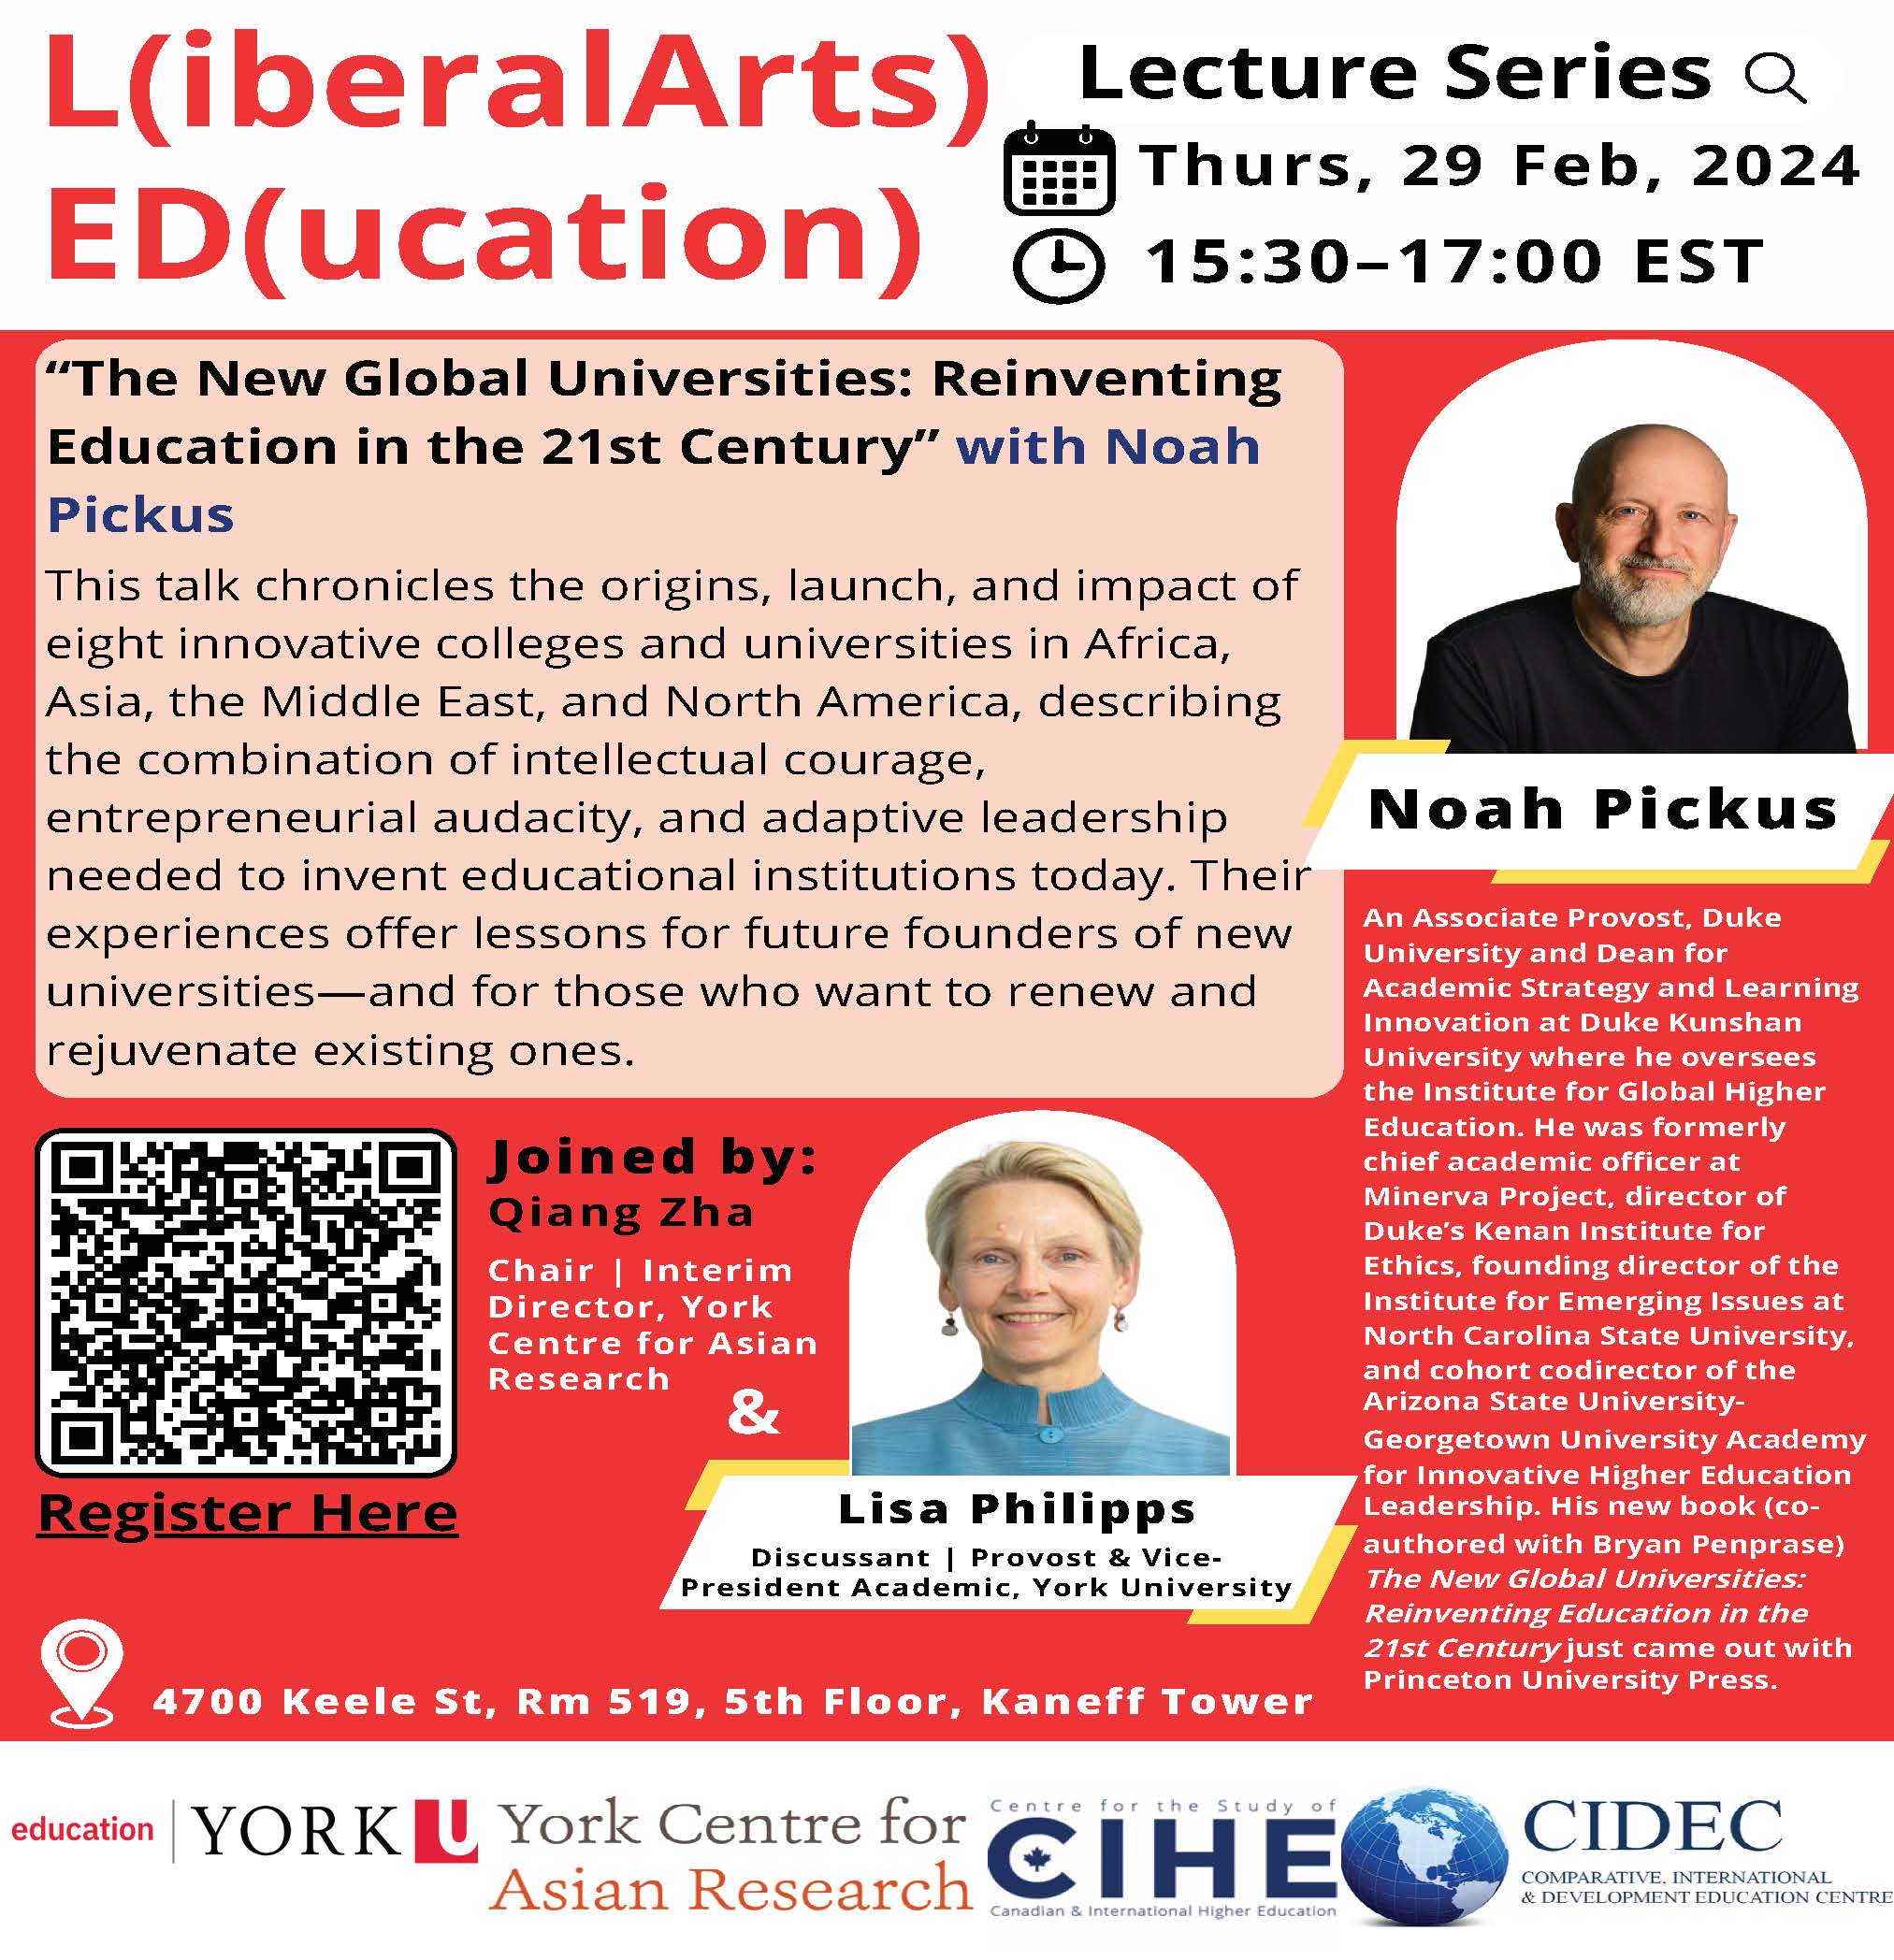 The New Global Universities: Reinventing Education in the 21st Century event flyer with full details including date, time, location of event with featured guest speakers Lisa Philipps, Noah Pickus and Qiang Zha